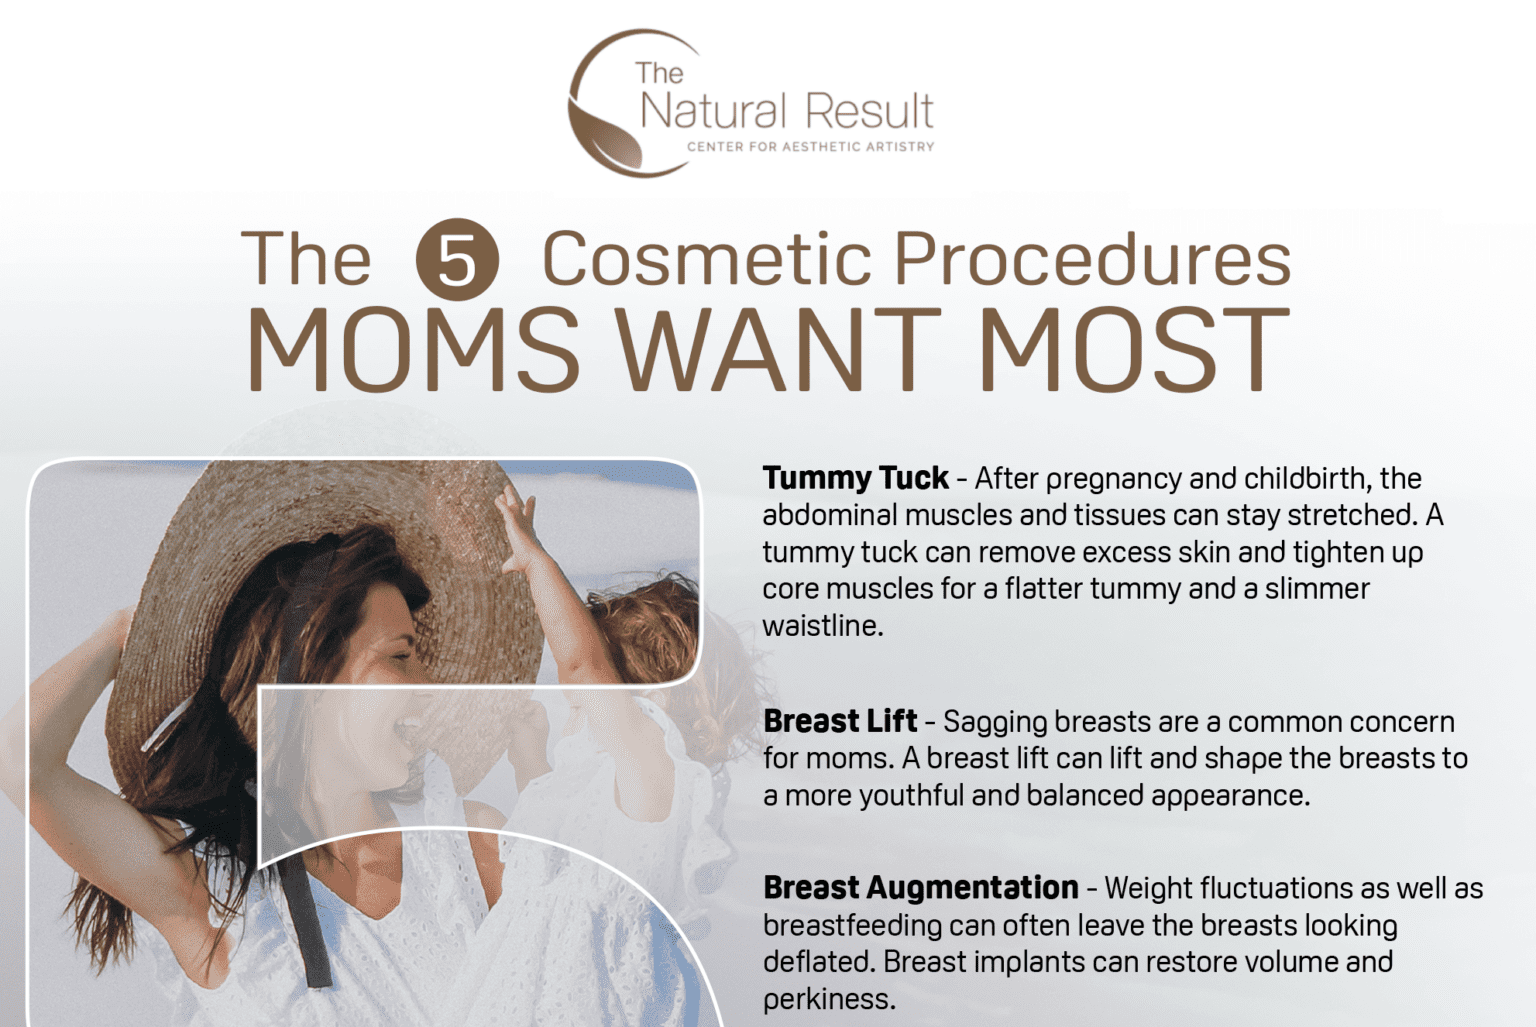 The 5 Cosmetic Procedures MOMS WANT MOST